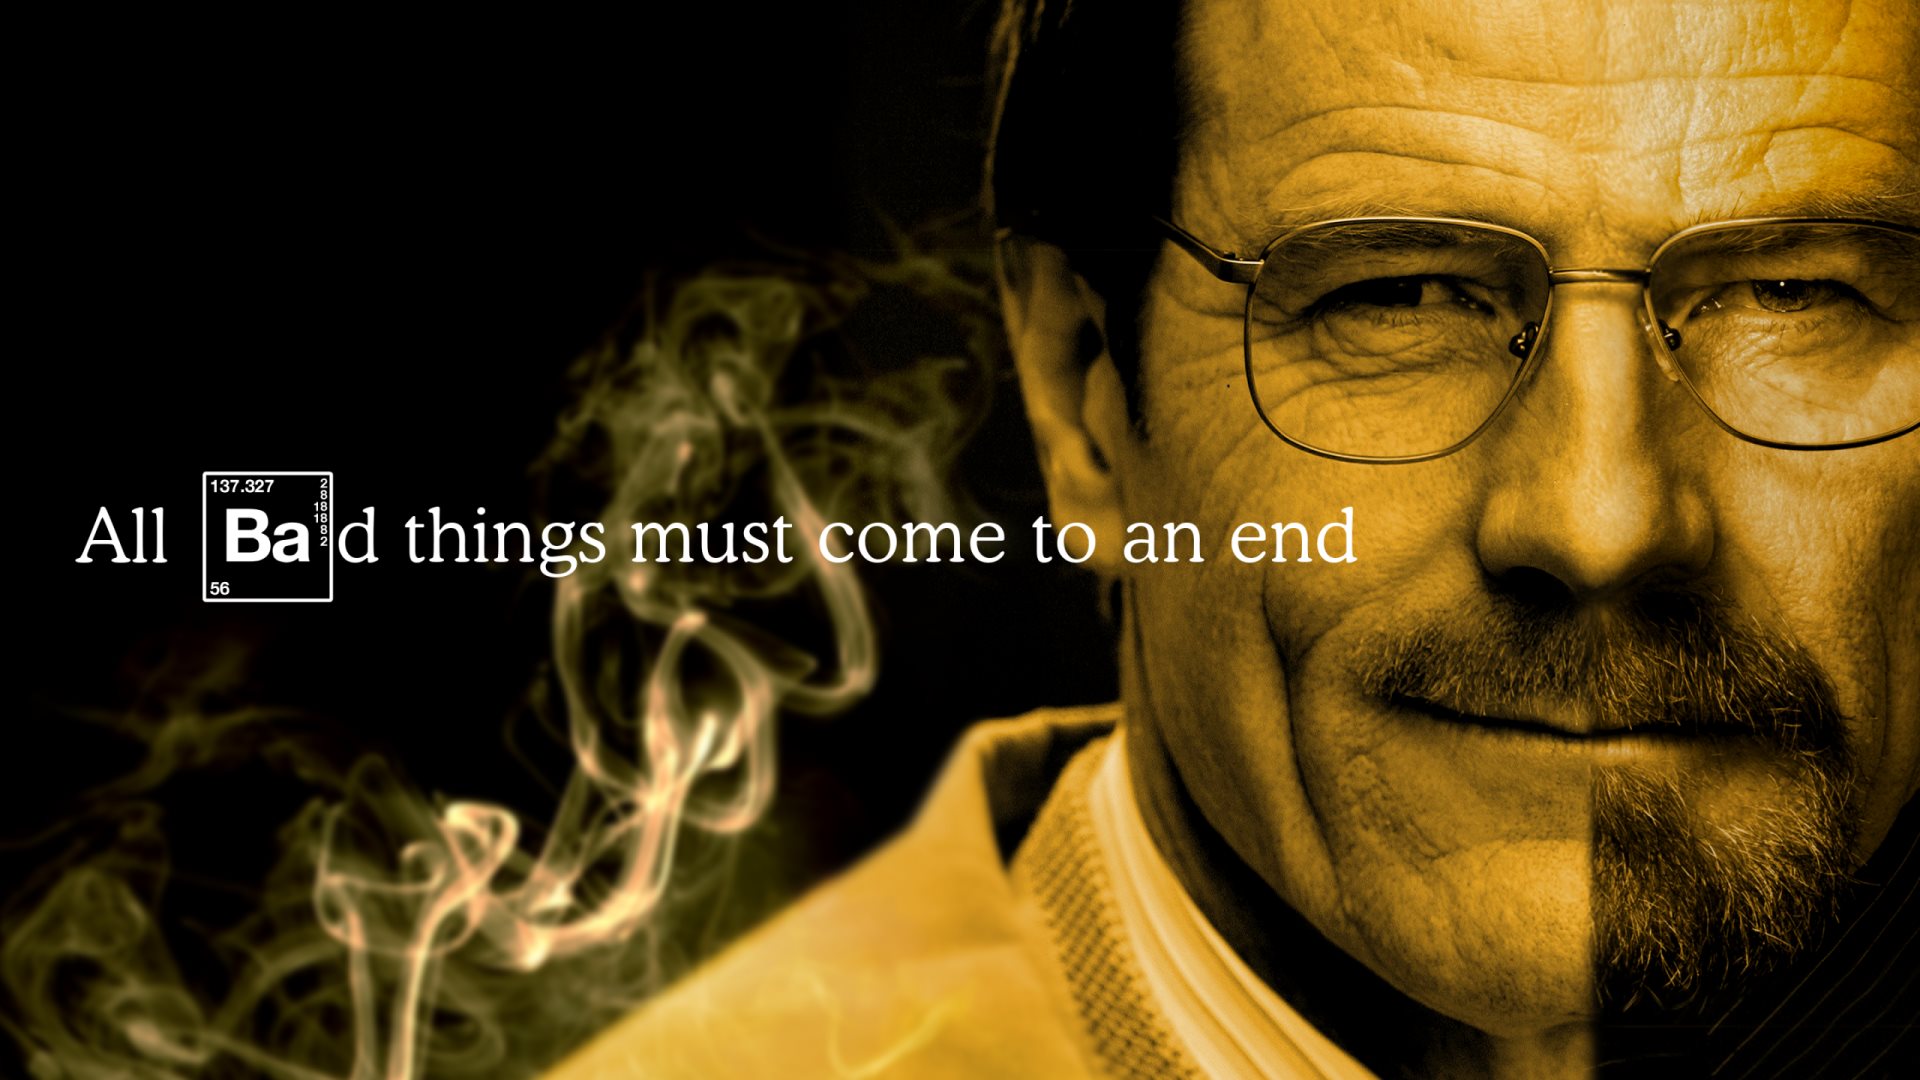 Breaking Bad Wallpaper High Quality